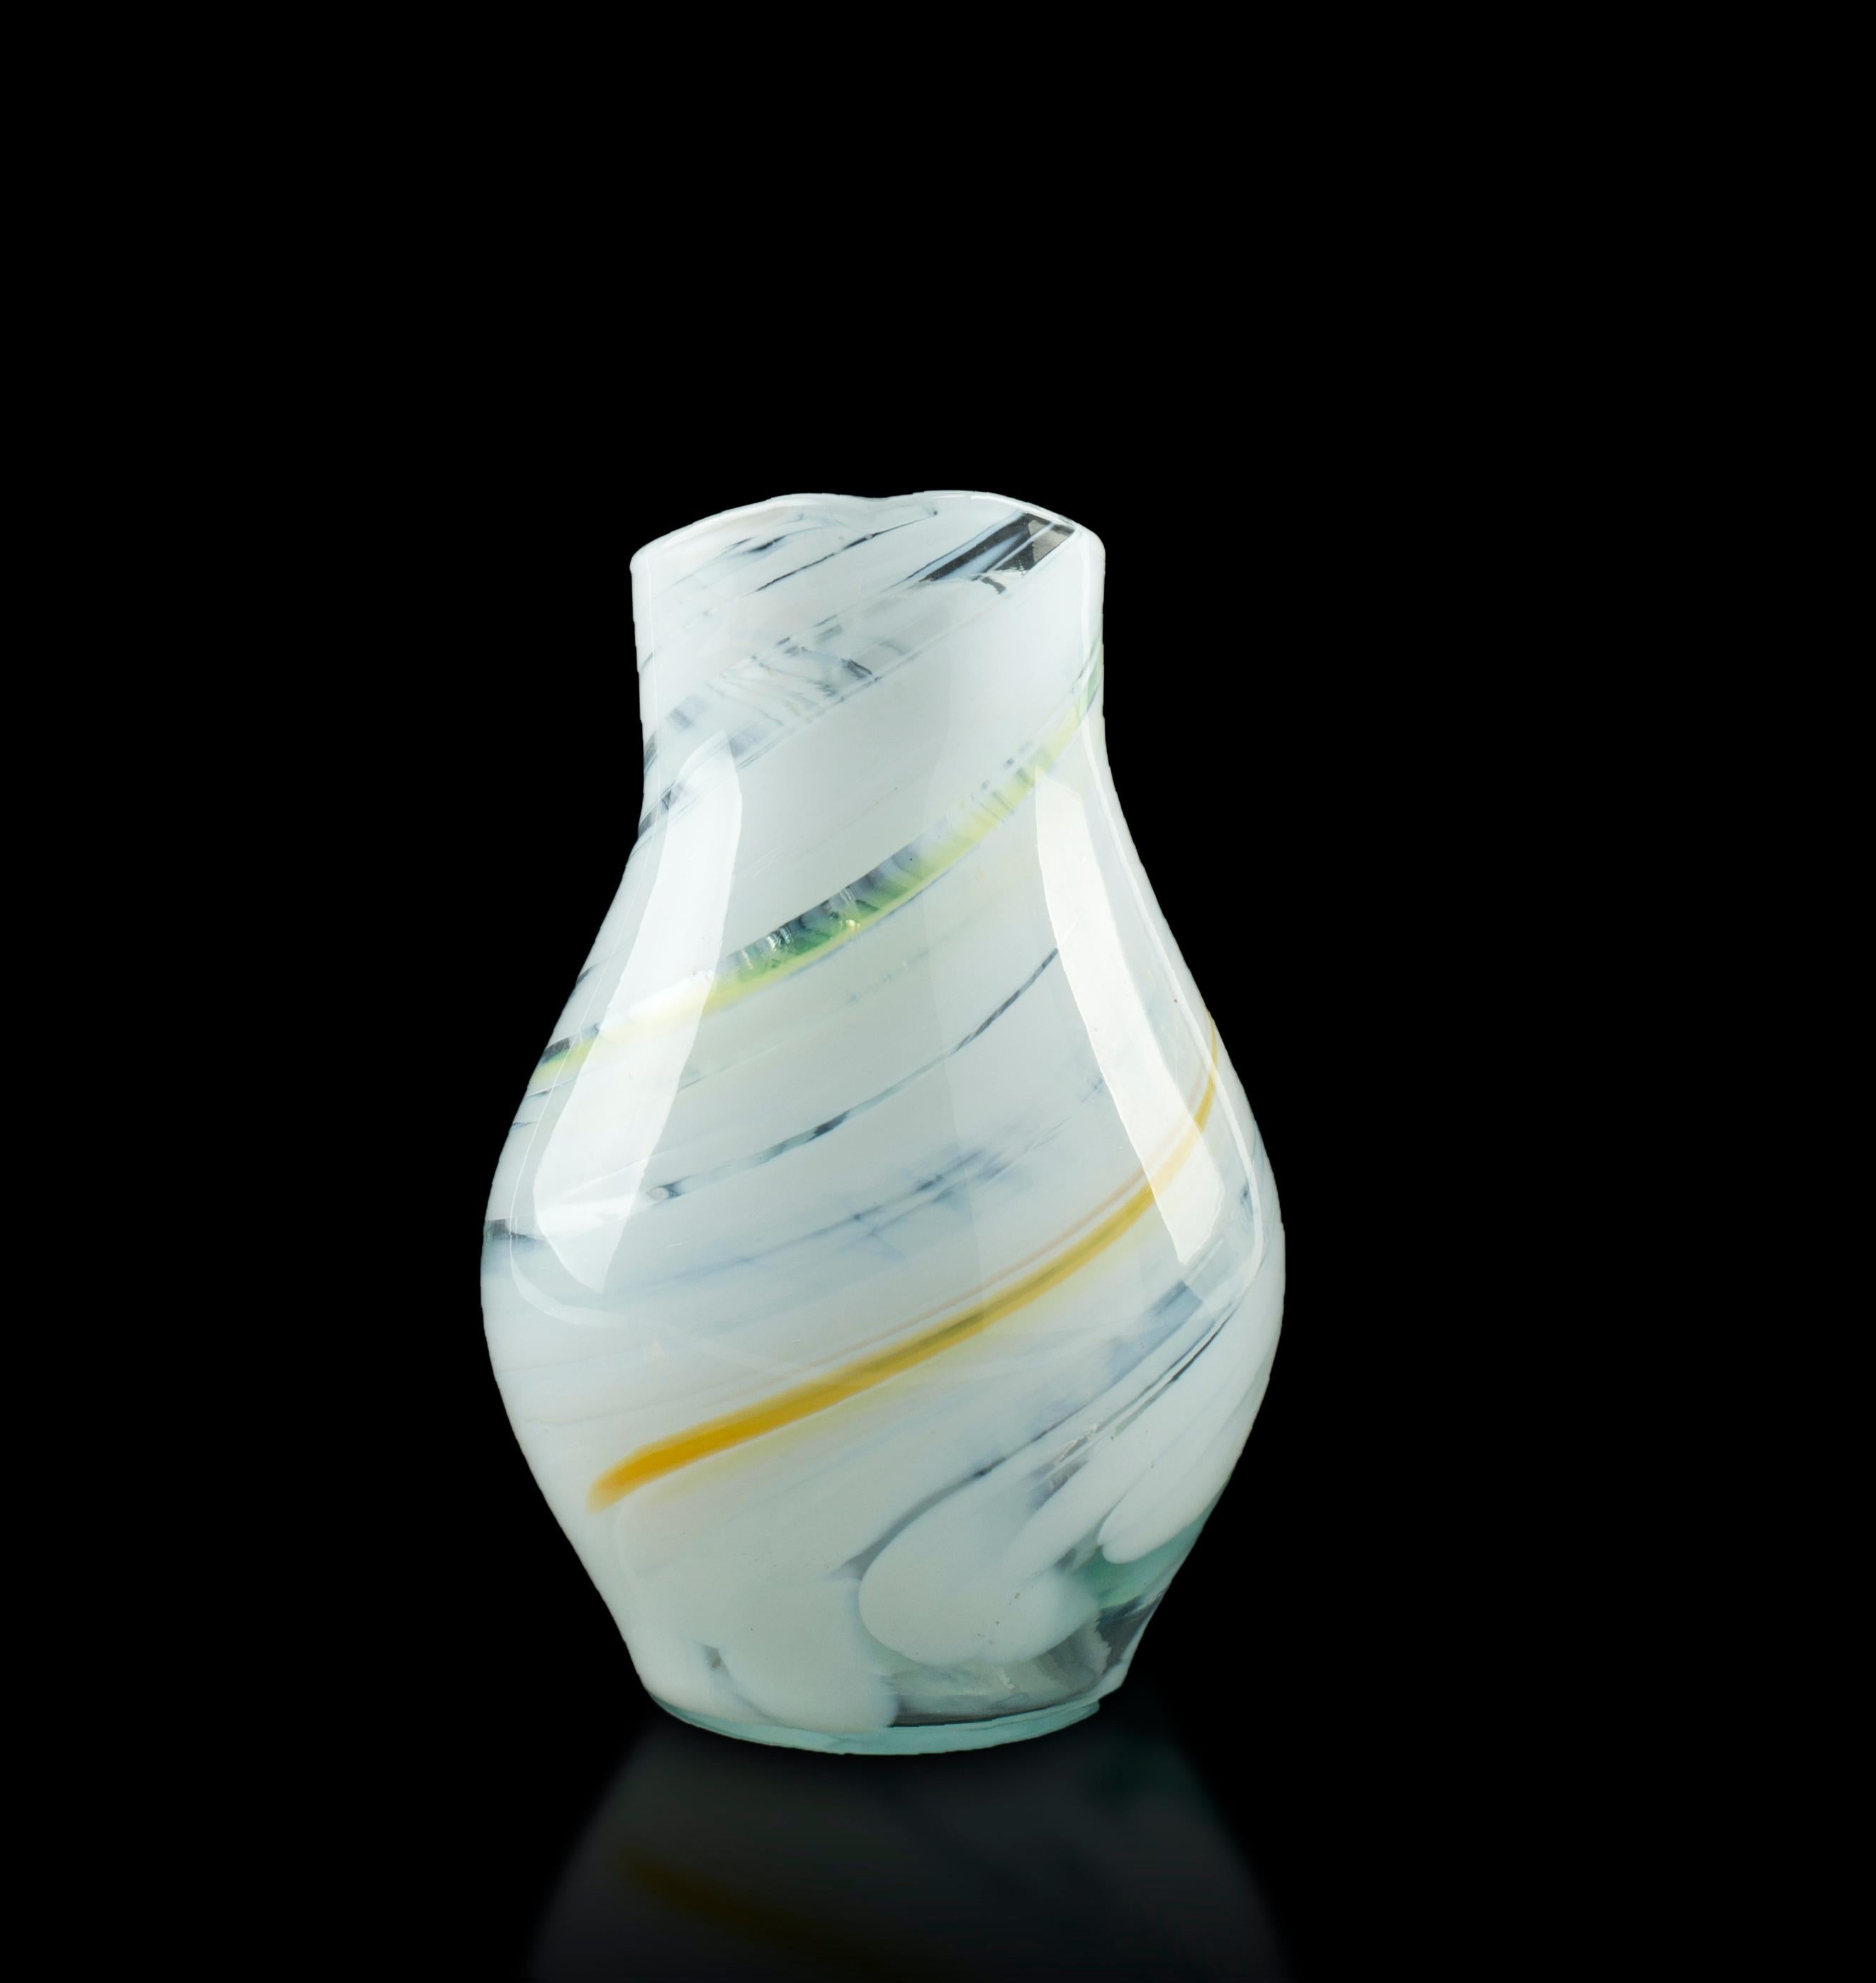 This glass carafe is a wonderful white glass jug with yellow and green streaks, realized during the 1980s by a Northern Europe manufacture.

This decorative objects is in excellent conditions.

This object is shipped from Italy. Under existing